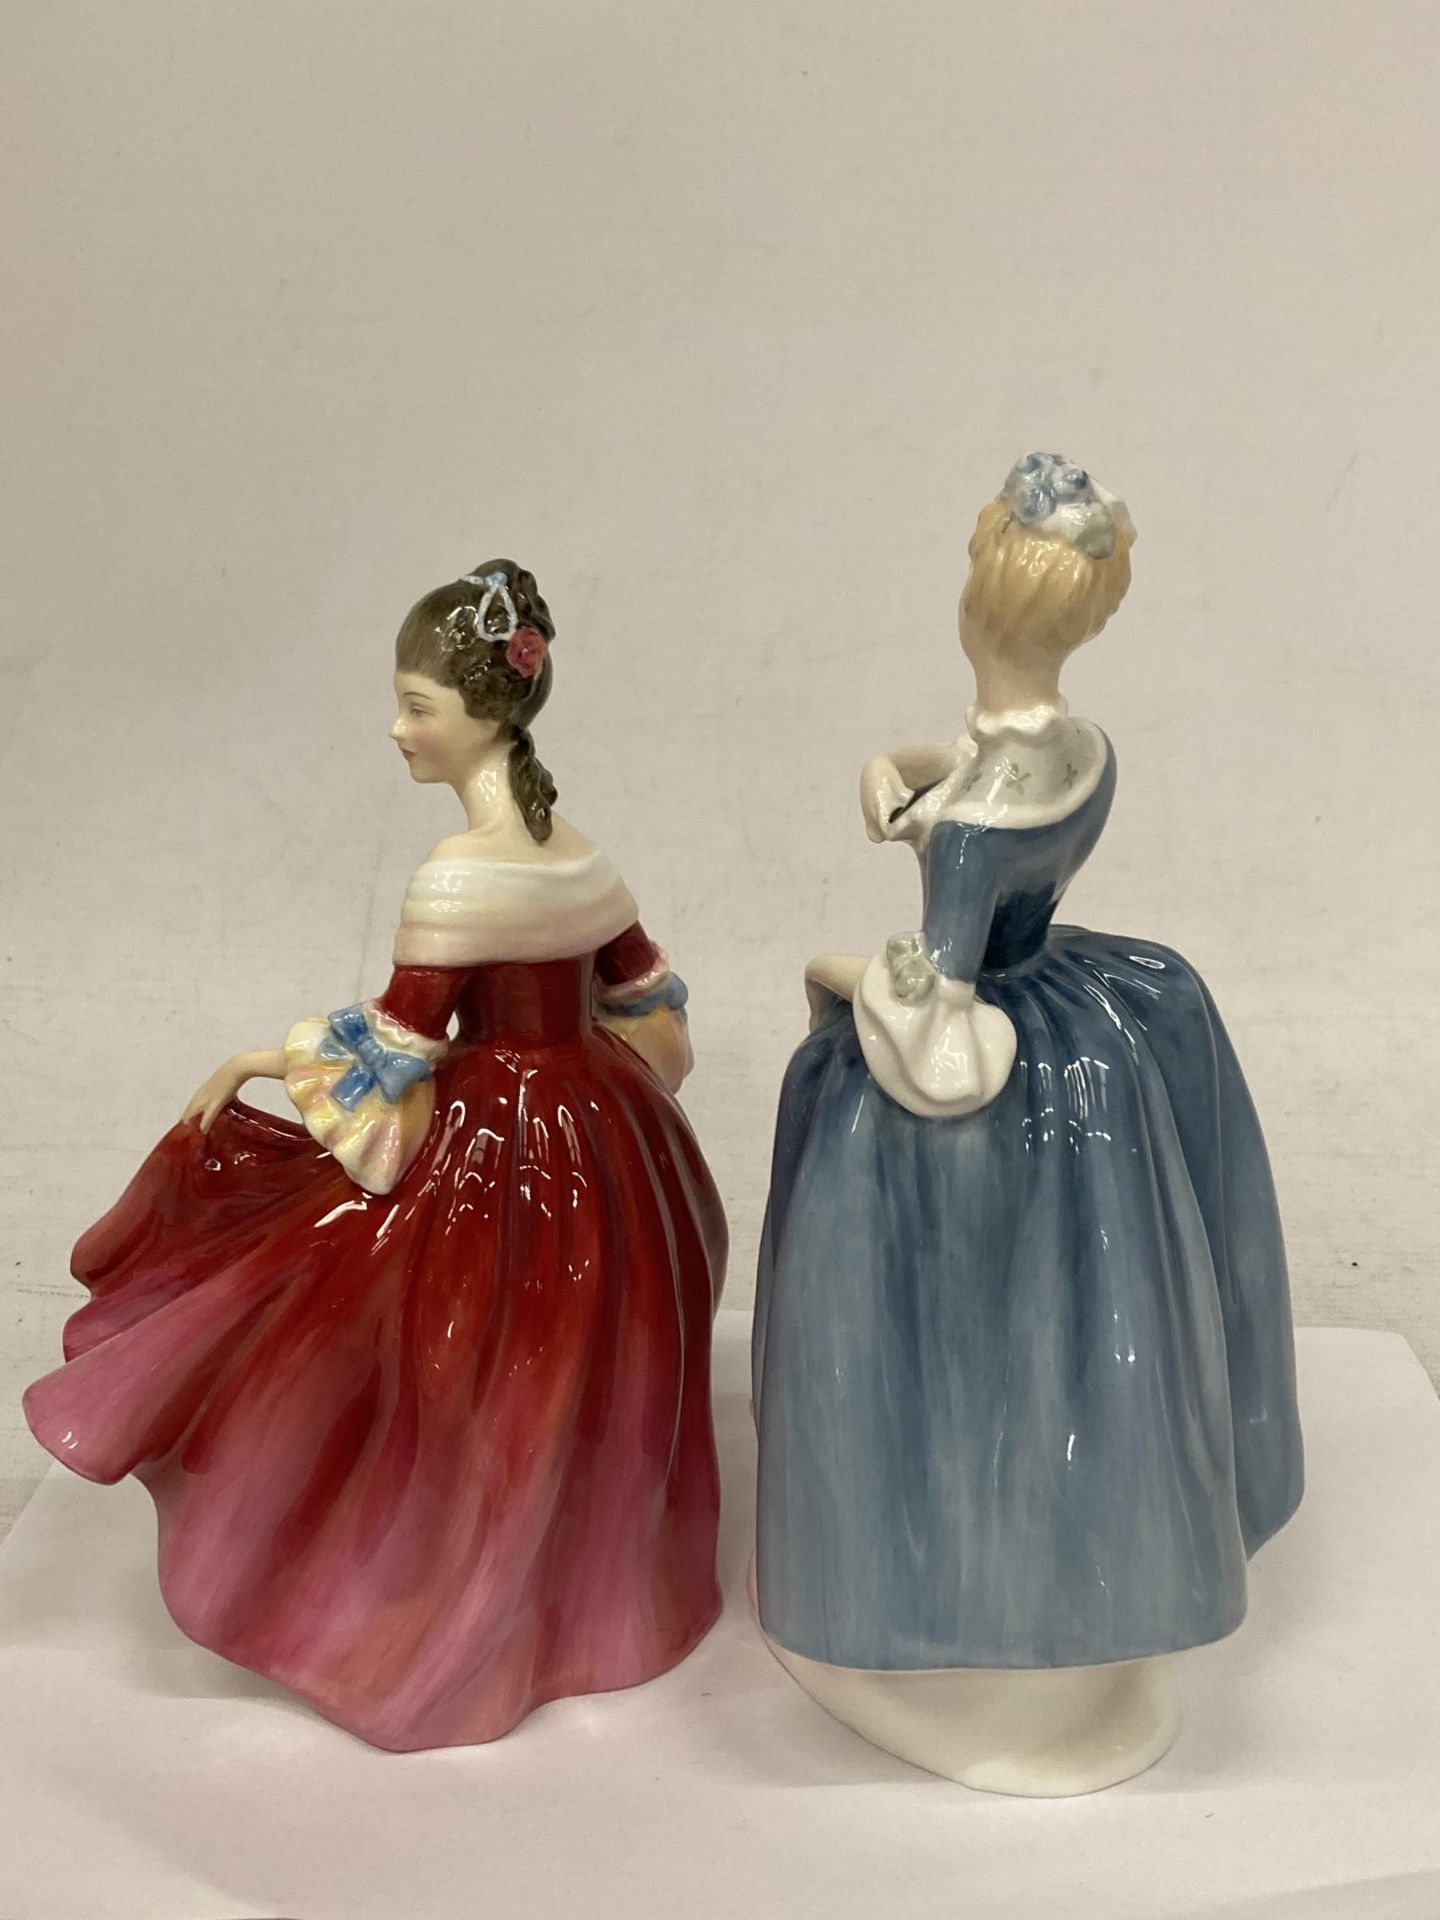 TWO ROYAL DOULTON FIGURINES "MASQUERADE" AND "SOUTHERN BELLE" - Image 3 of 4